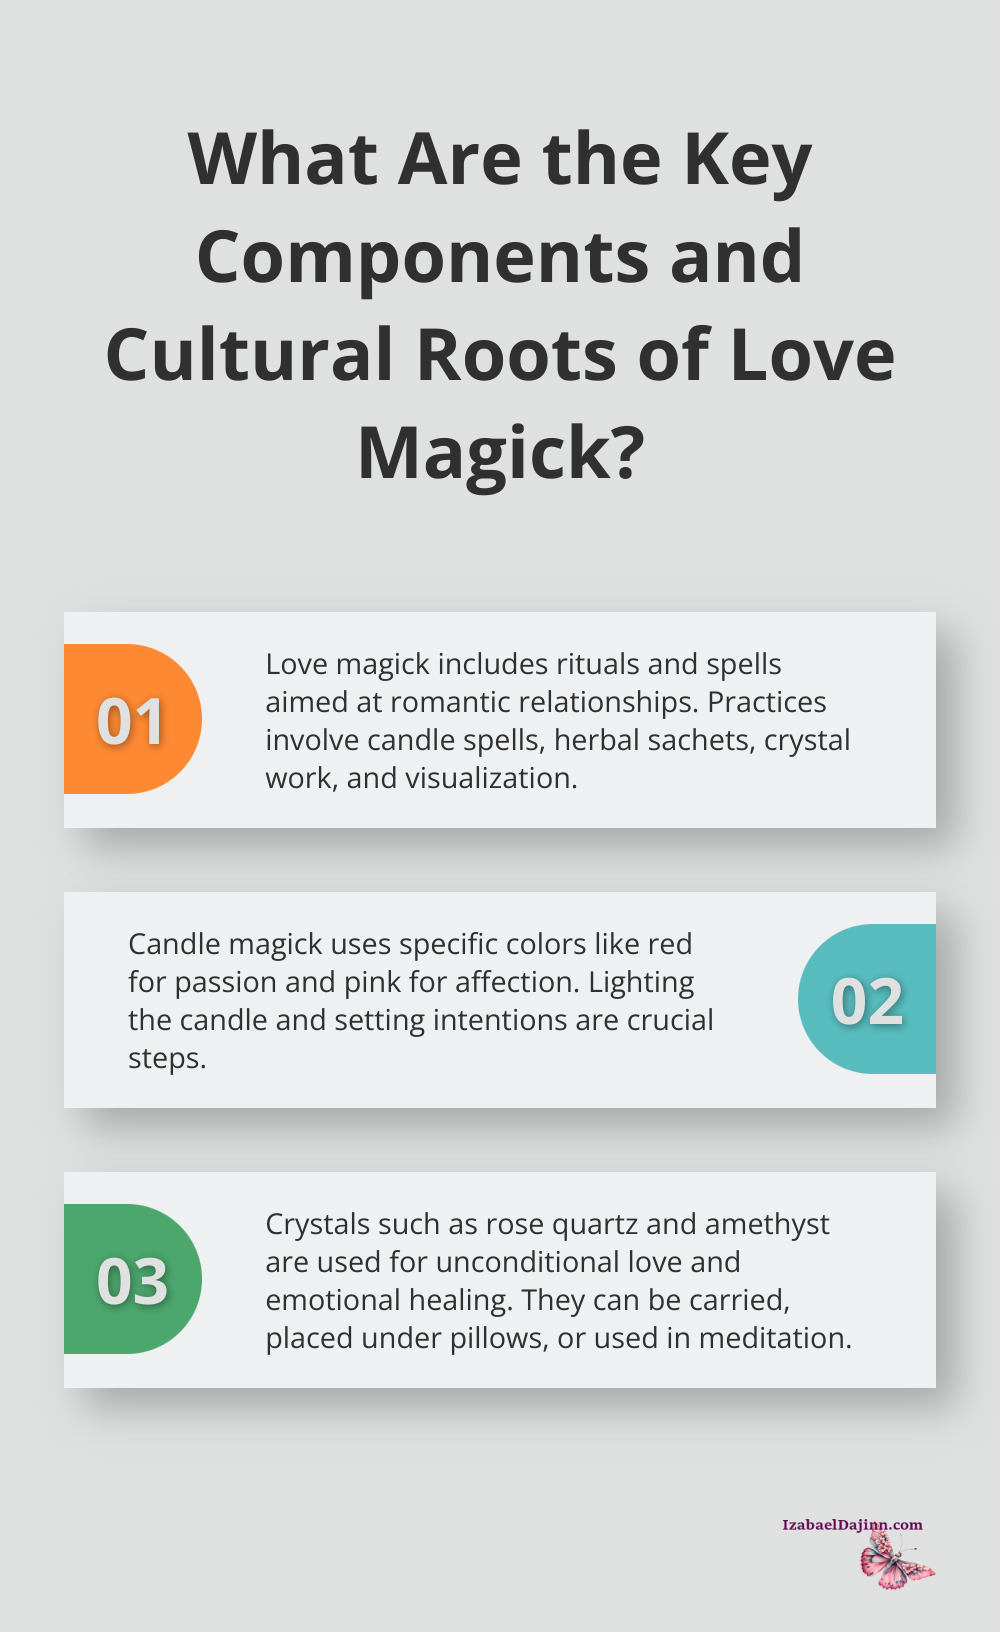 Fact - What Are the Key Components and Cultural Roots of Love Magick?